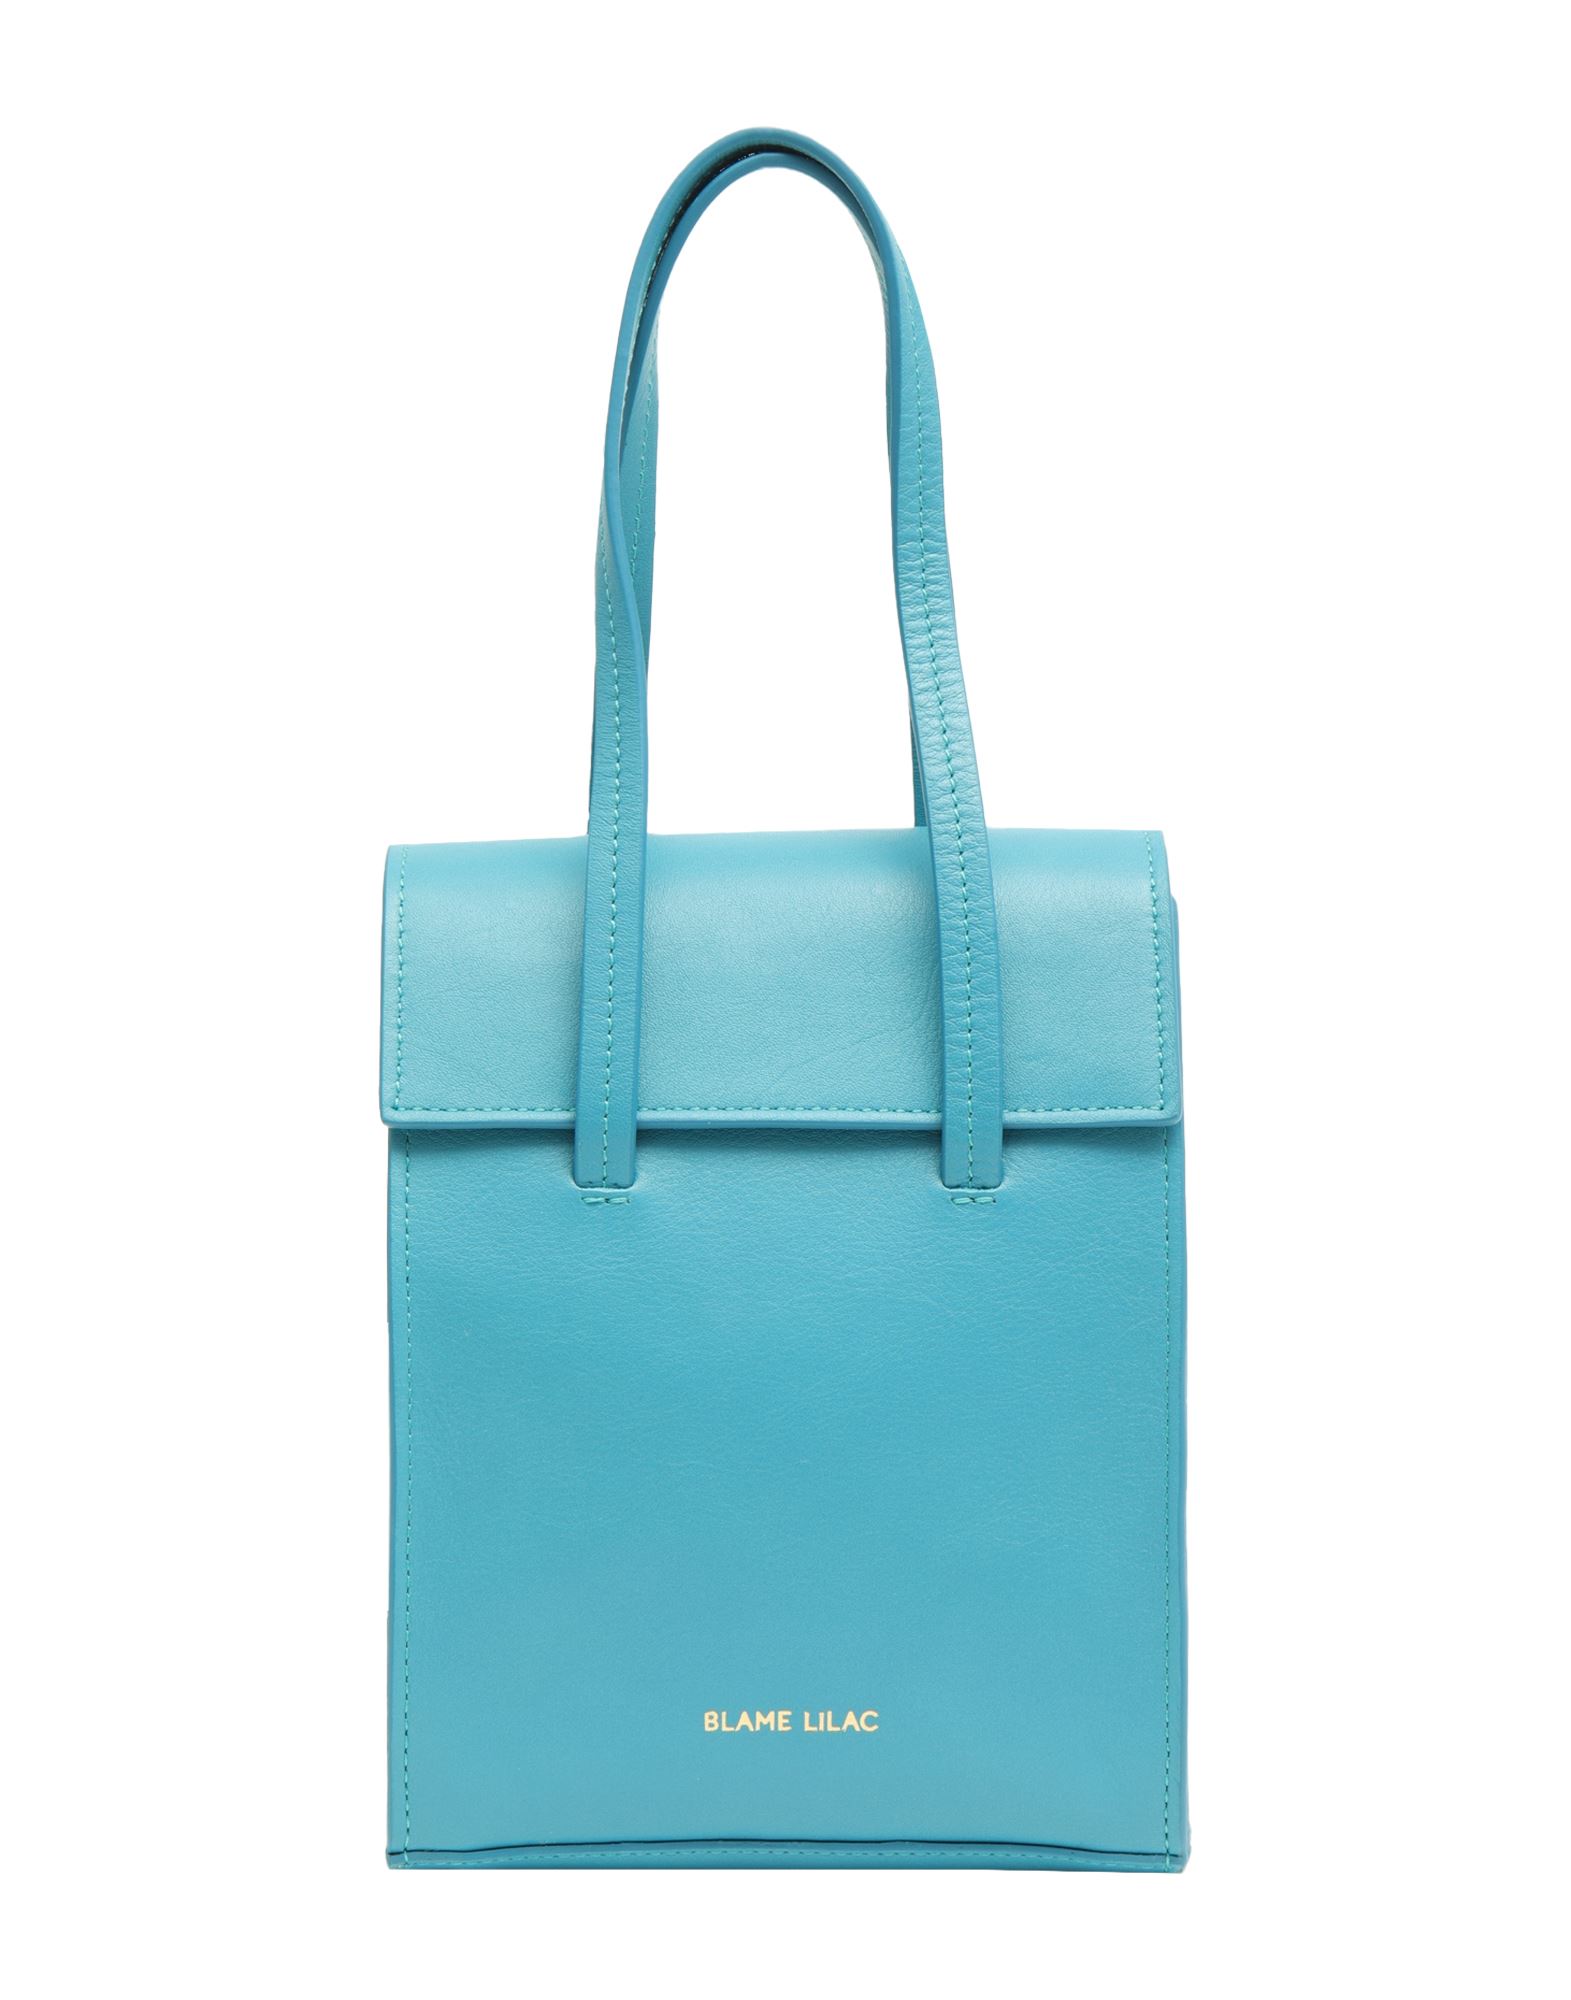 Blame Lilac Handbags In Turquoise